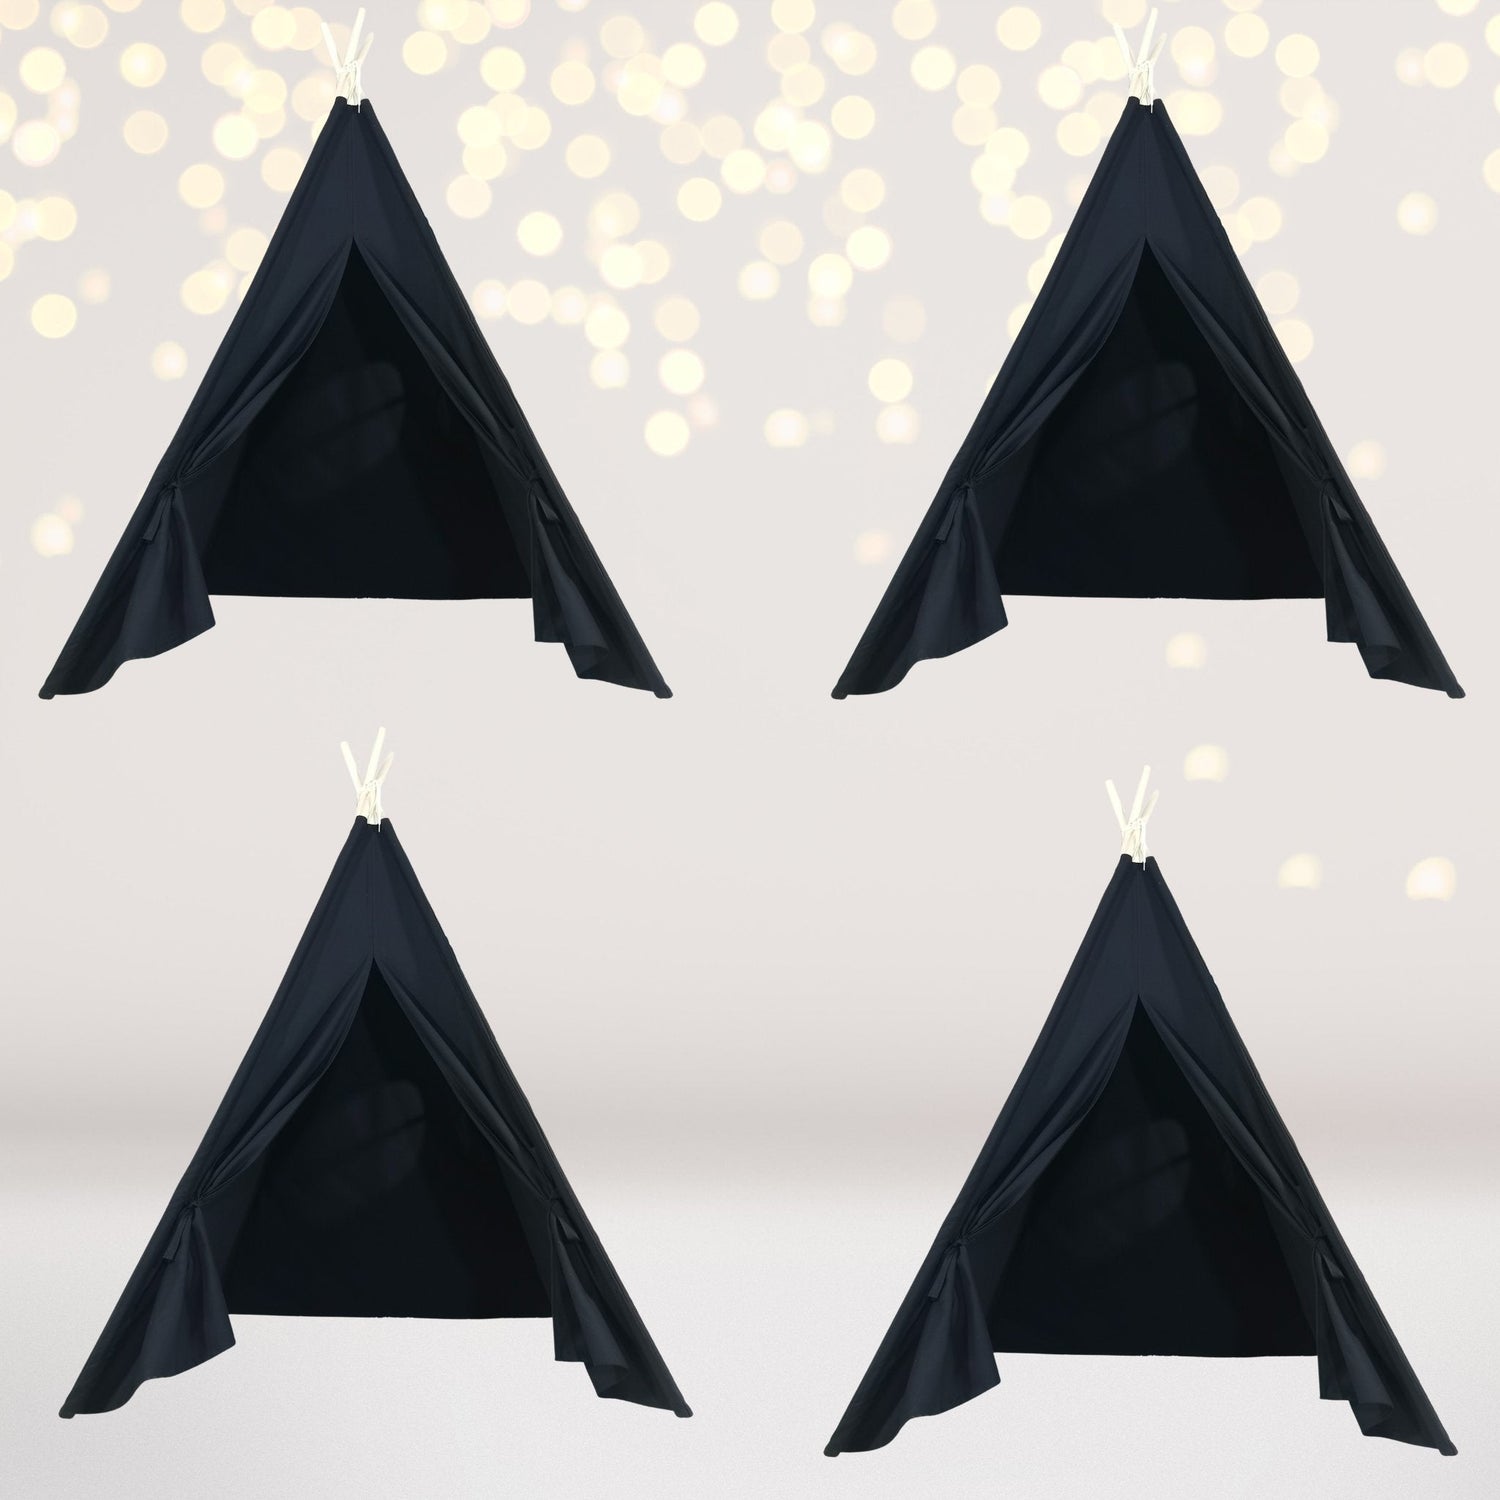 4 pack Kids Sleepover Tents-LUXE Kids Teepee Tent with Lights- Party Pack Black